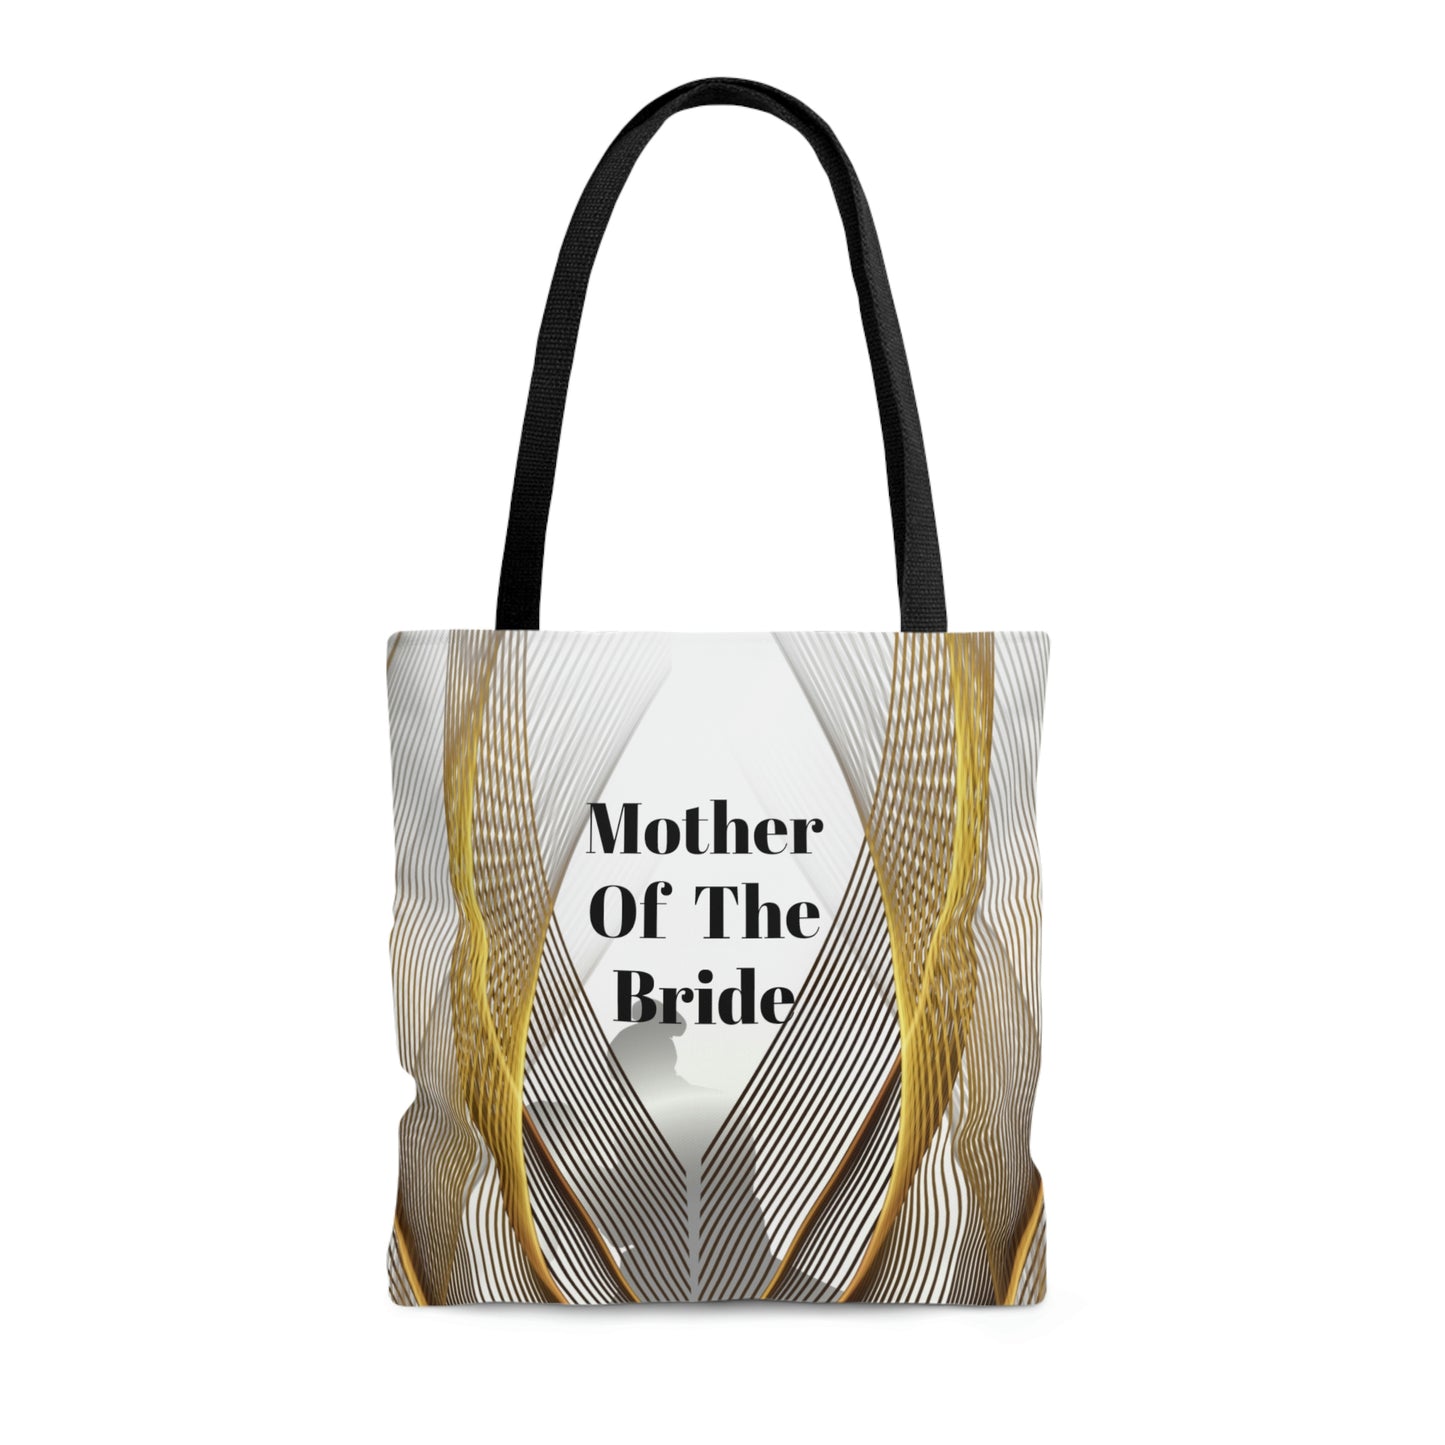 Mother Of The Bride Gift Bag | White Tote | Practical Wedding Gift | Bridal Shower Gifts